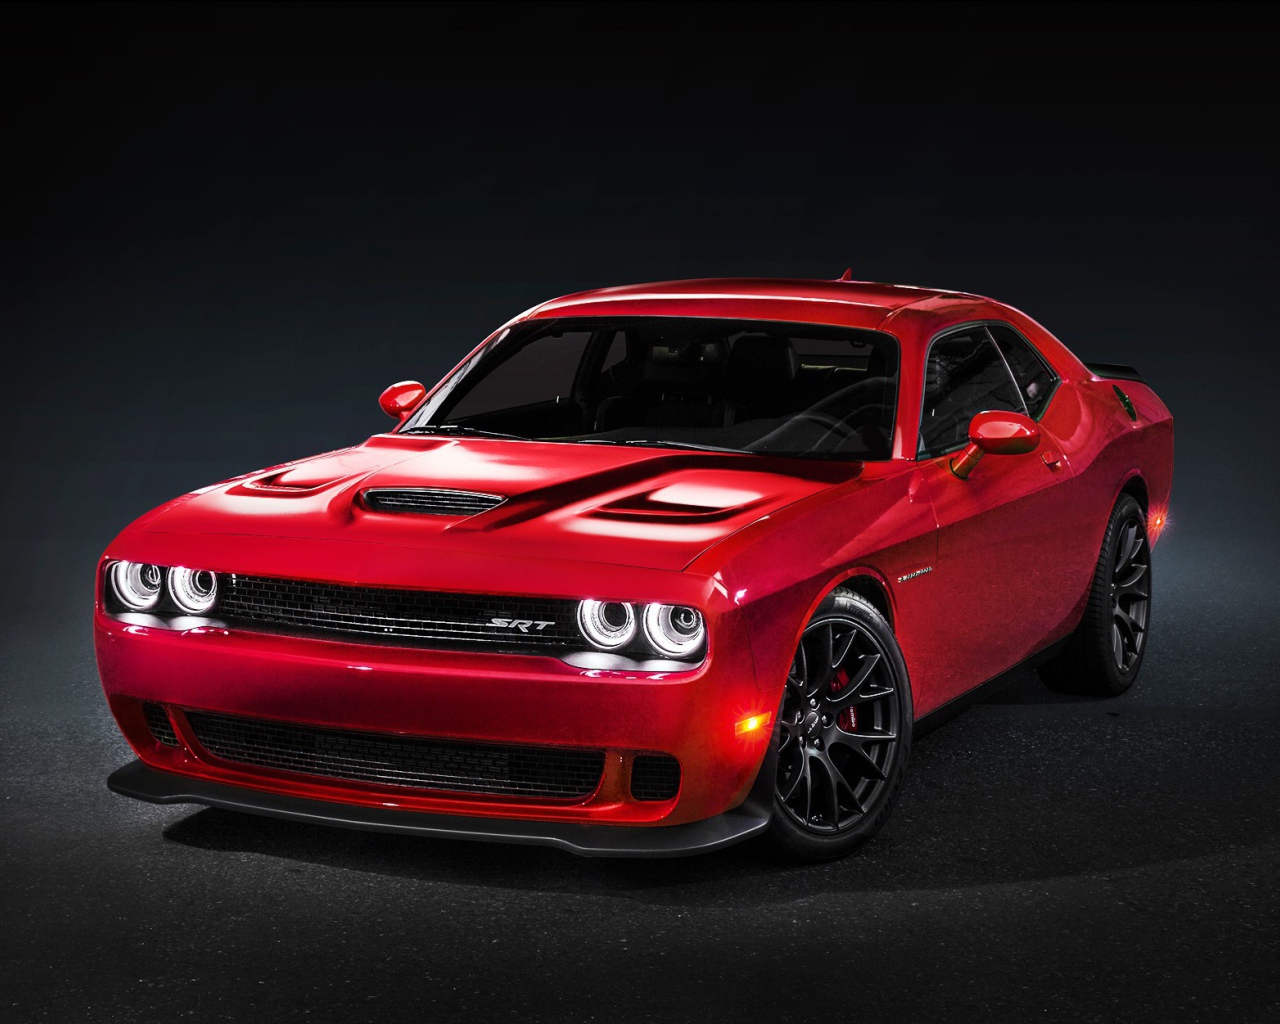 Red Dodge Challenger Hellcat on a black background